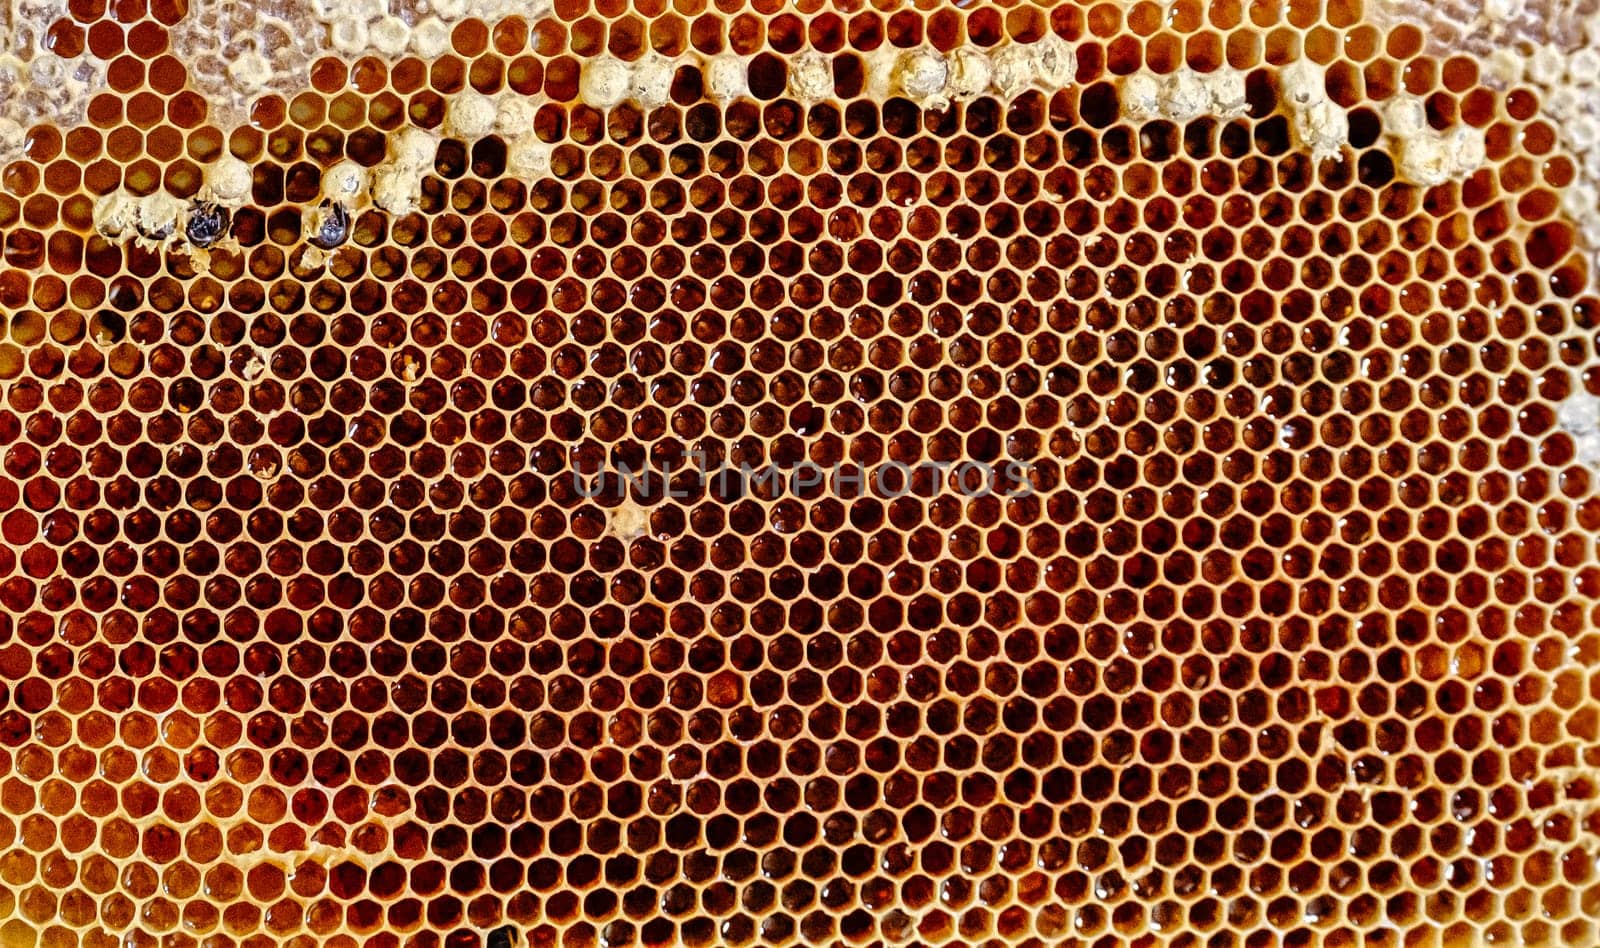 Honeycomb. Photo of honey cells filled with fresh honey. Concept of beekeeping. by igor010